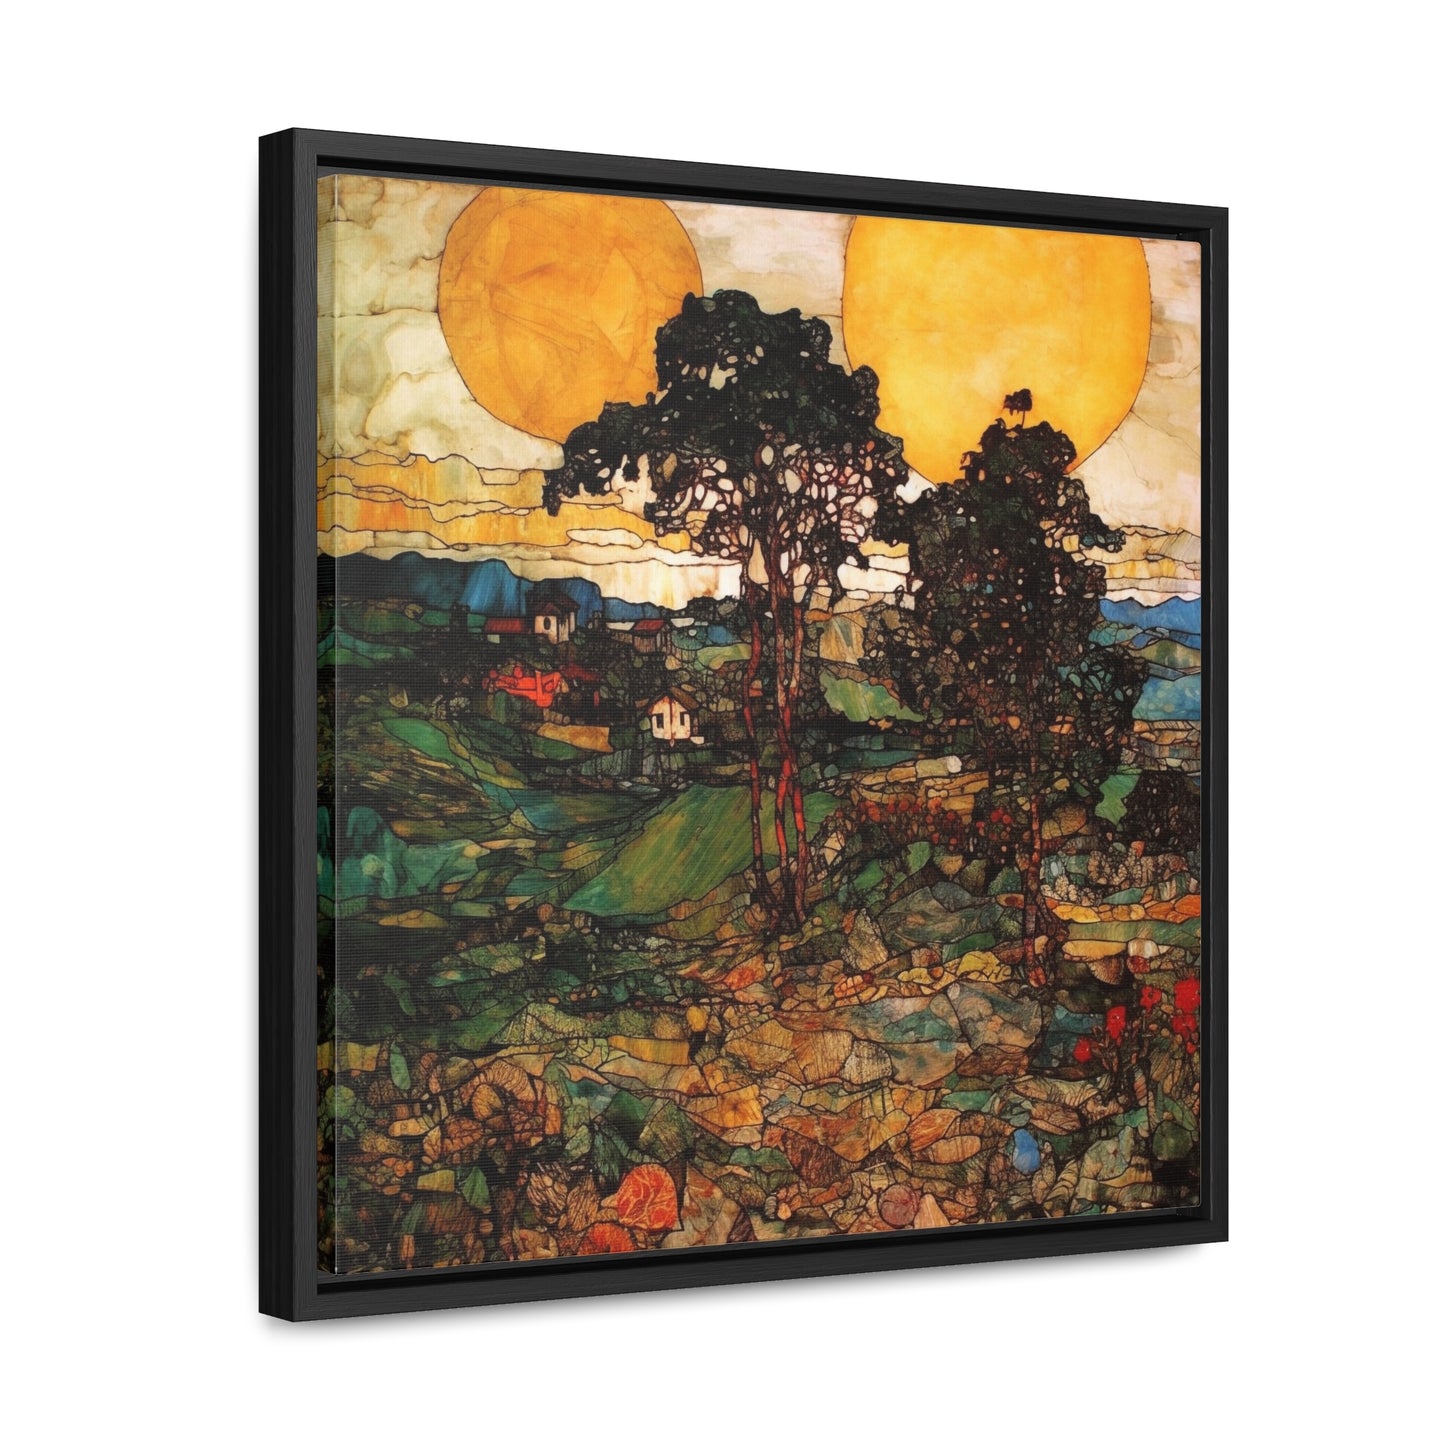 Land of the Sun 38, Gallery Canvas Wraps, Square Frame